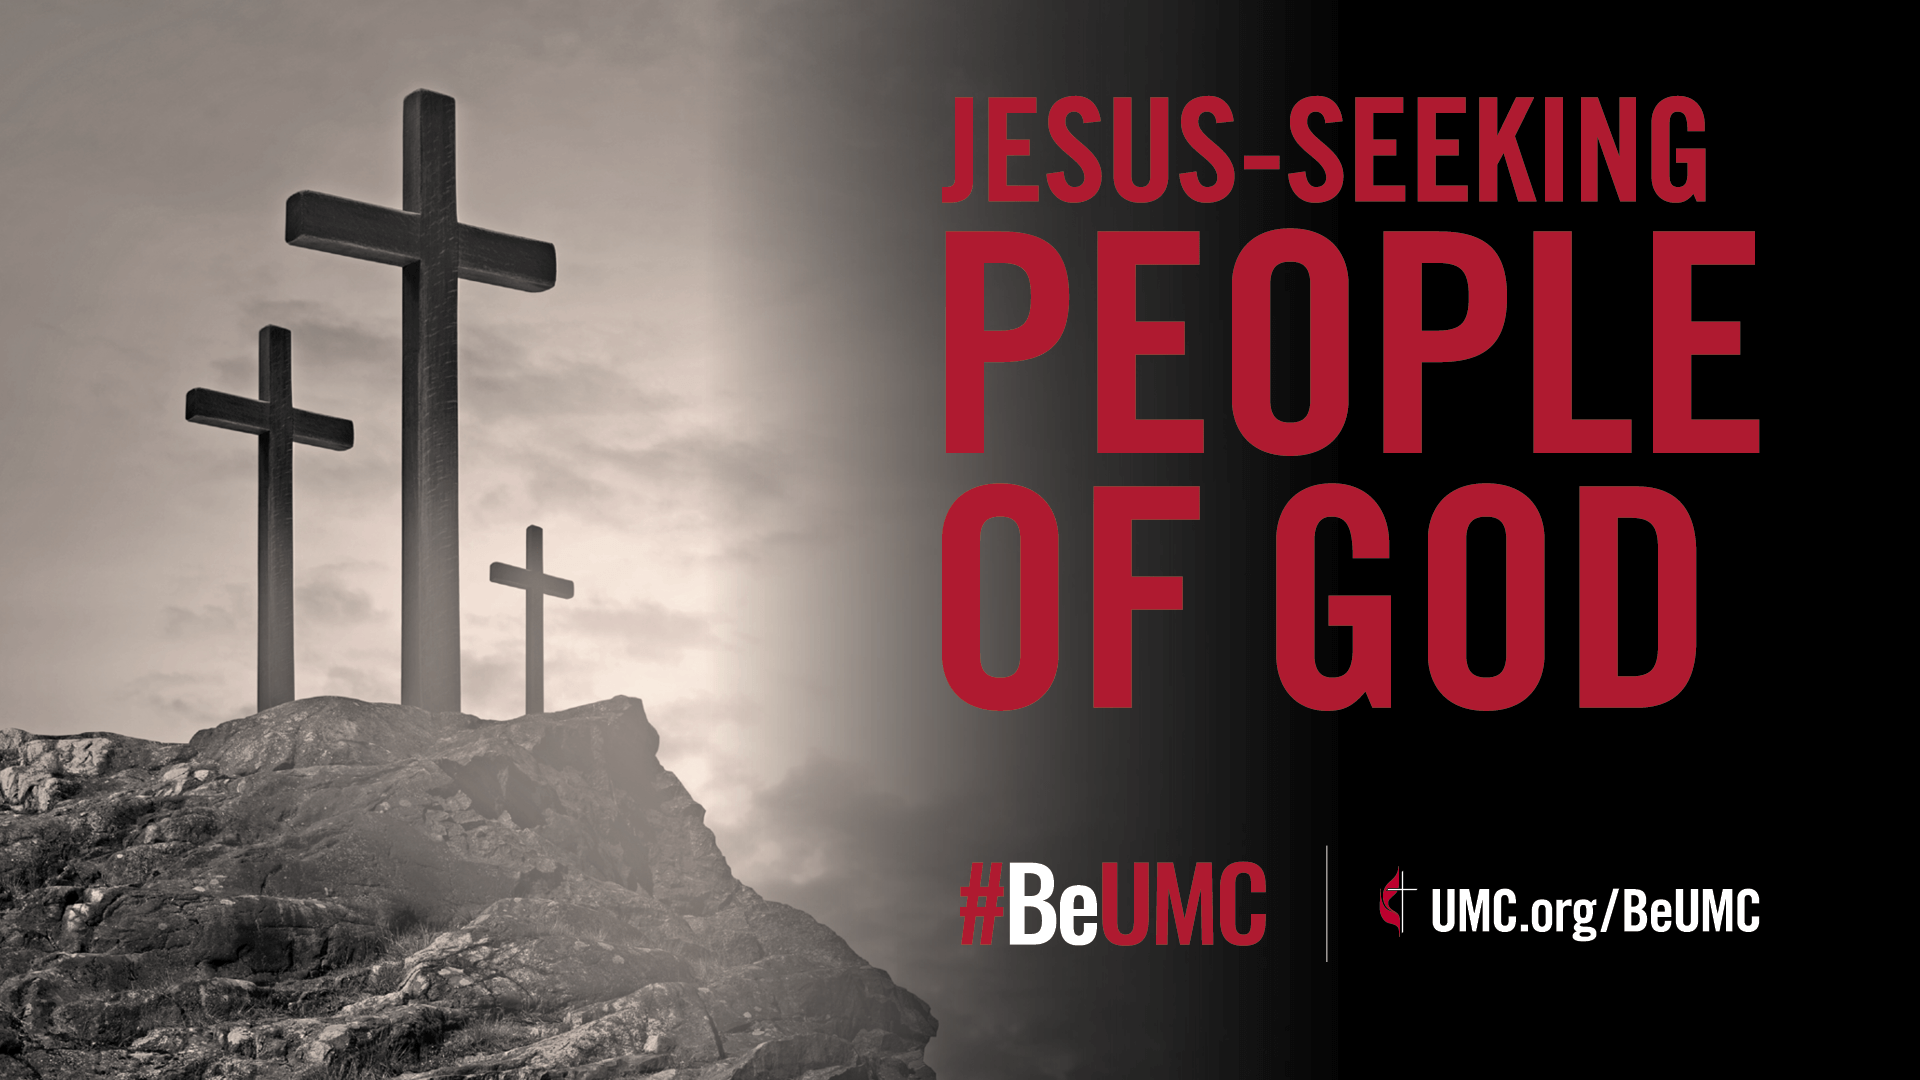 We cherish our deepening relationship with God. The People of God campaign celebrates the core values that connect the people of The United Methodist Church. Image for Jesus-seeking, crosses (worship graphic).